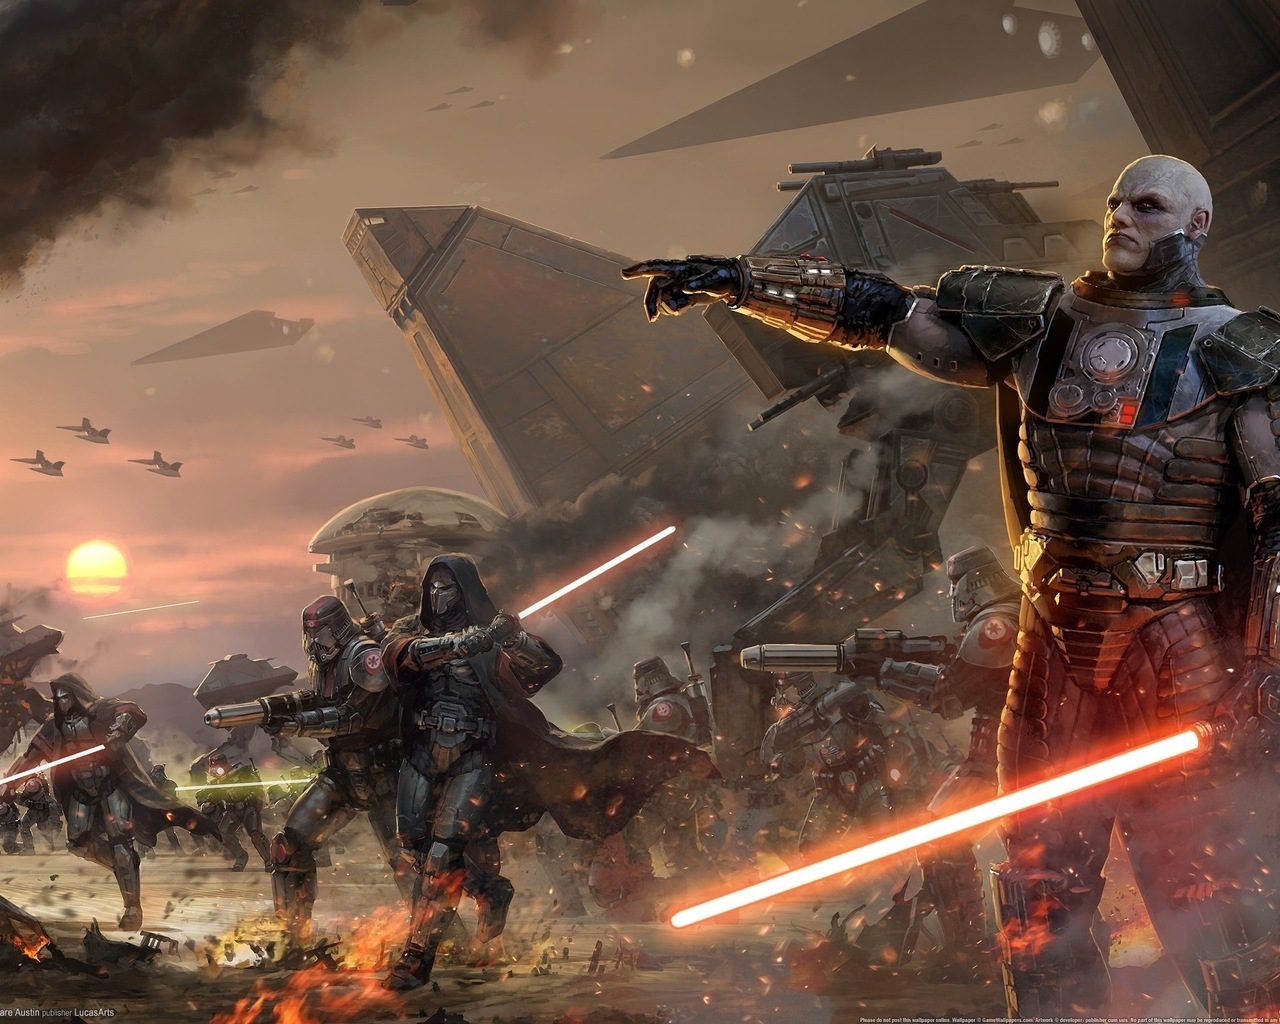 Star Wars Old Republic for 1280 x 1024 resolution